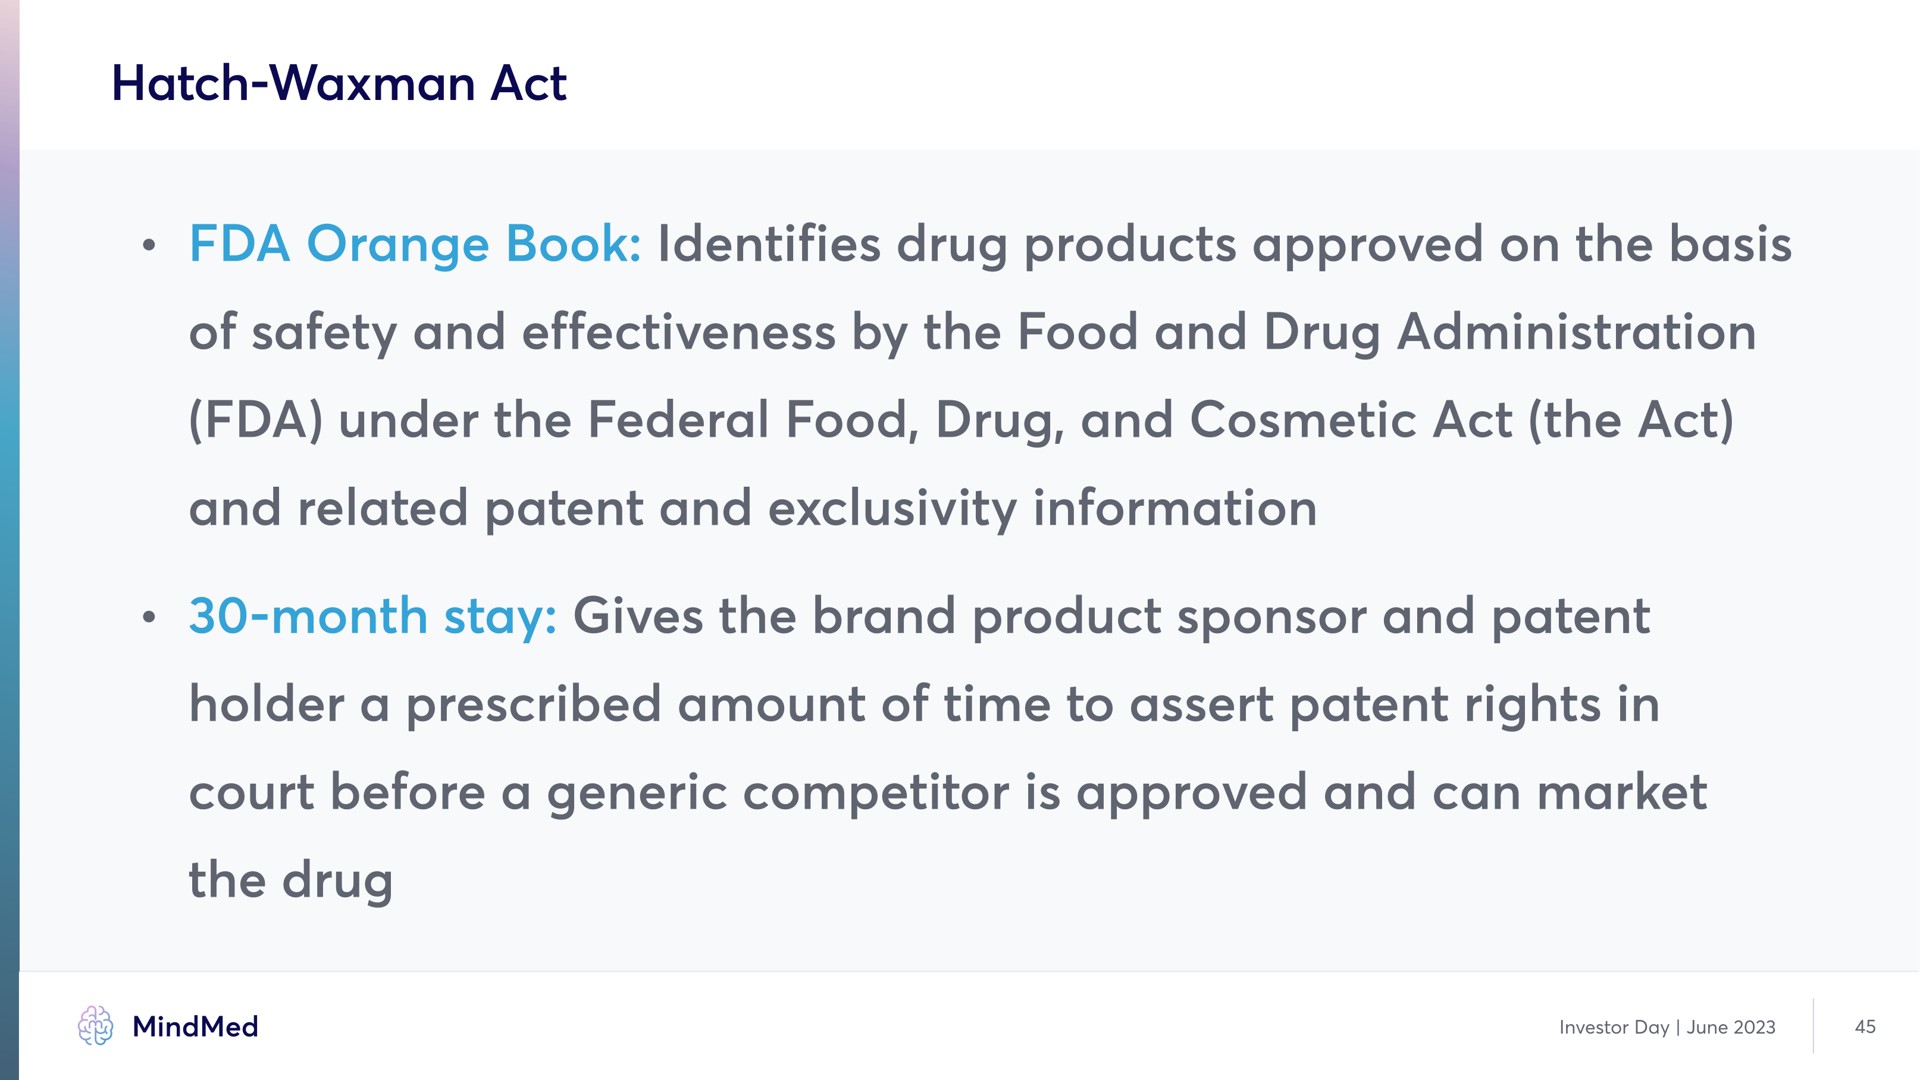 hatch waxman act orange book identifies drug products approved on the basis of safety and effectiveness by the food and drug administration under the federal food drug and cosmetic act the act and related patent and exclusivity month stay gives the brand product sponsor and patent holder a prescribed amount of time to assert patent rights in court before a generic competitor is approved and can market the drug information | MindMed